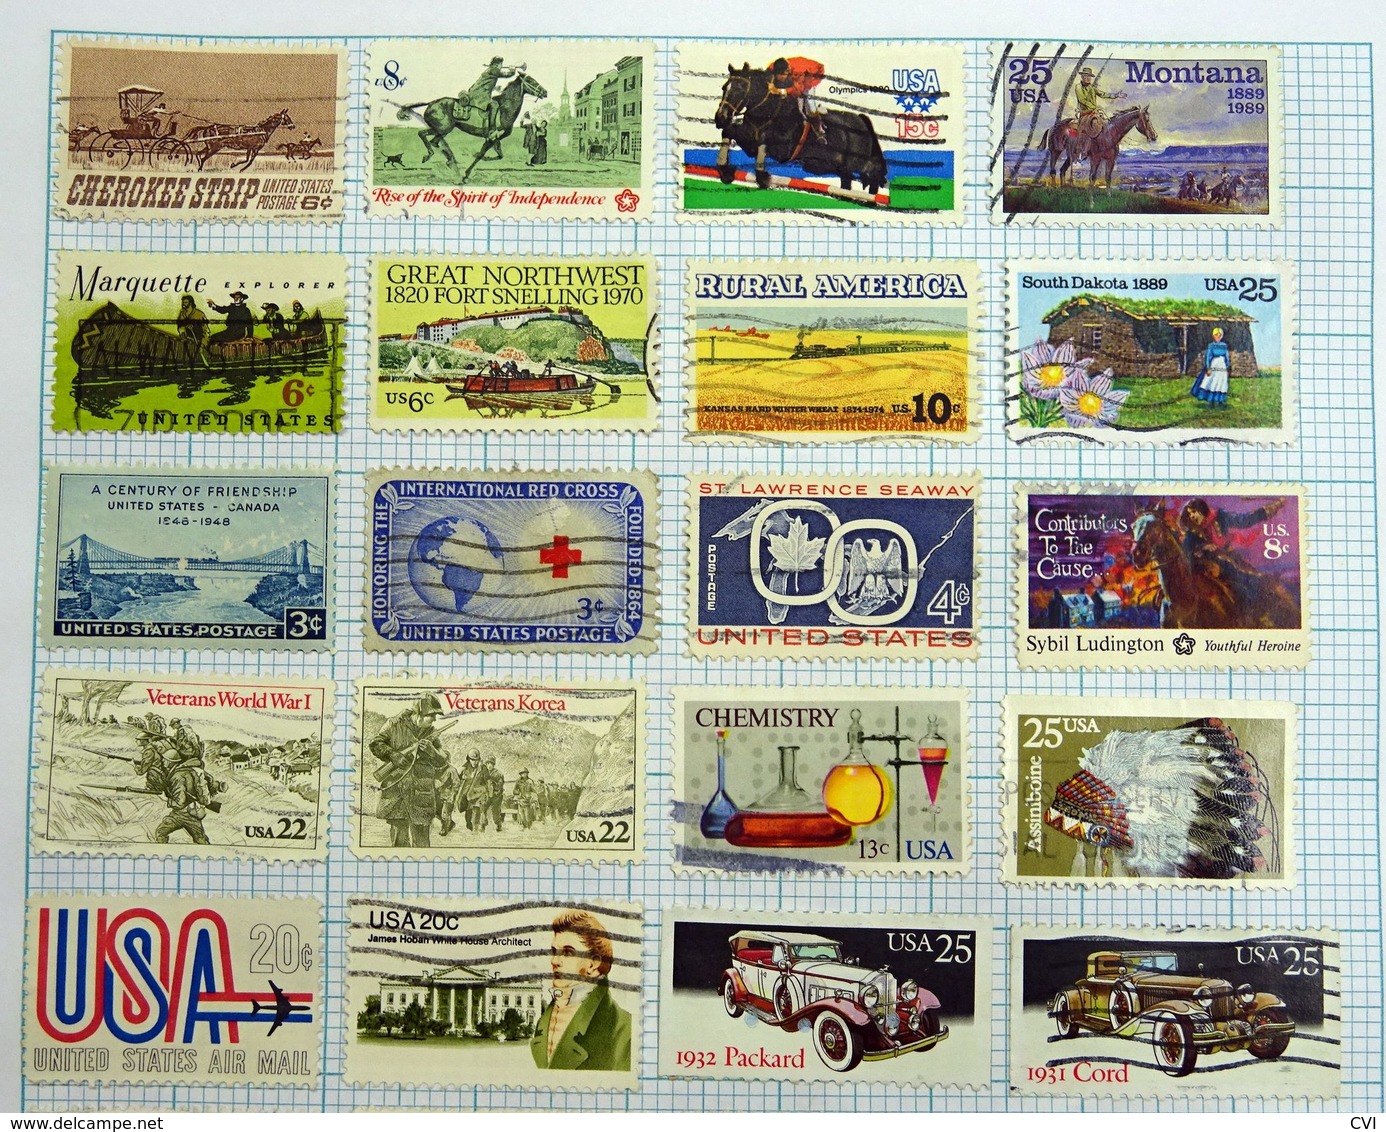 USA Mid Period to Modern, Air Mail, Christmas Stamps, etc on Pages.